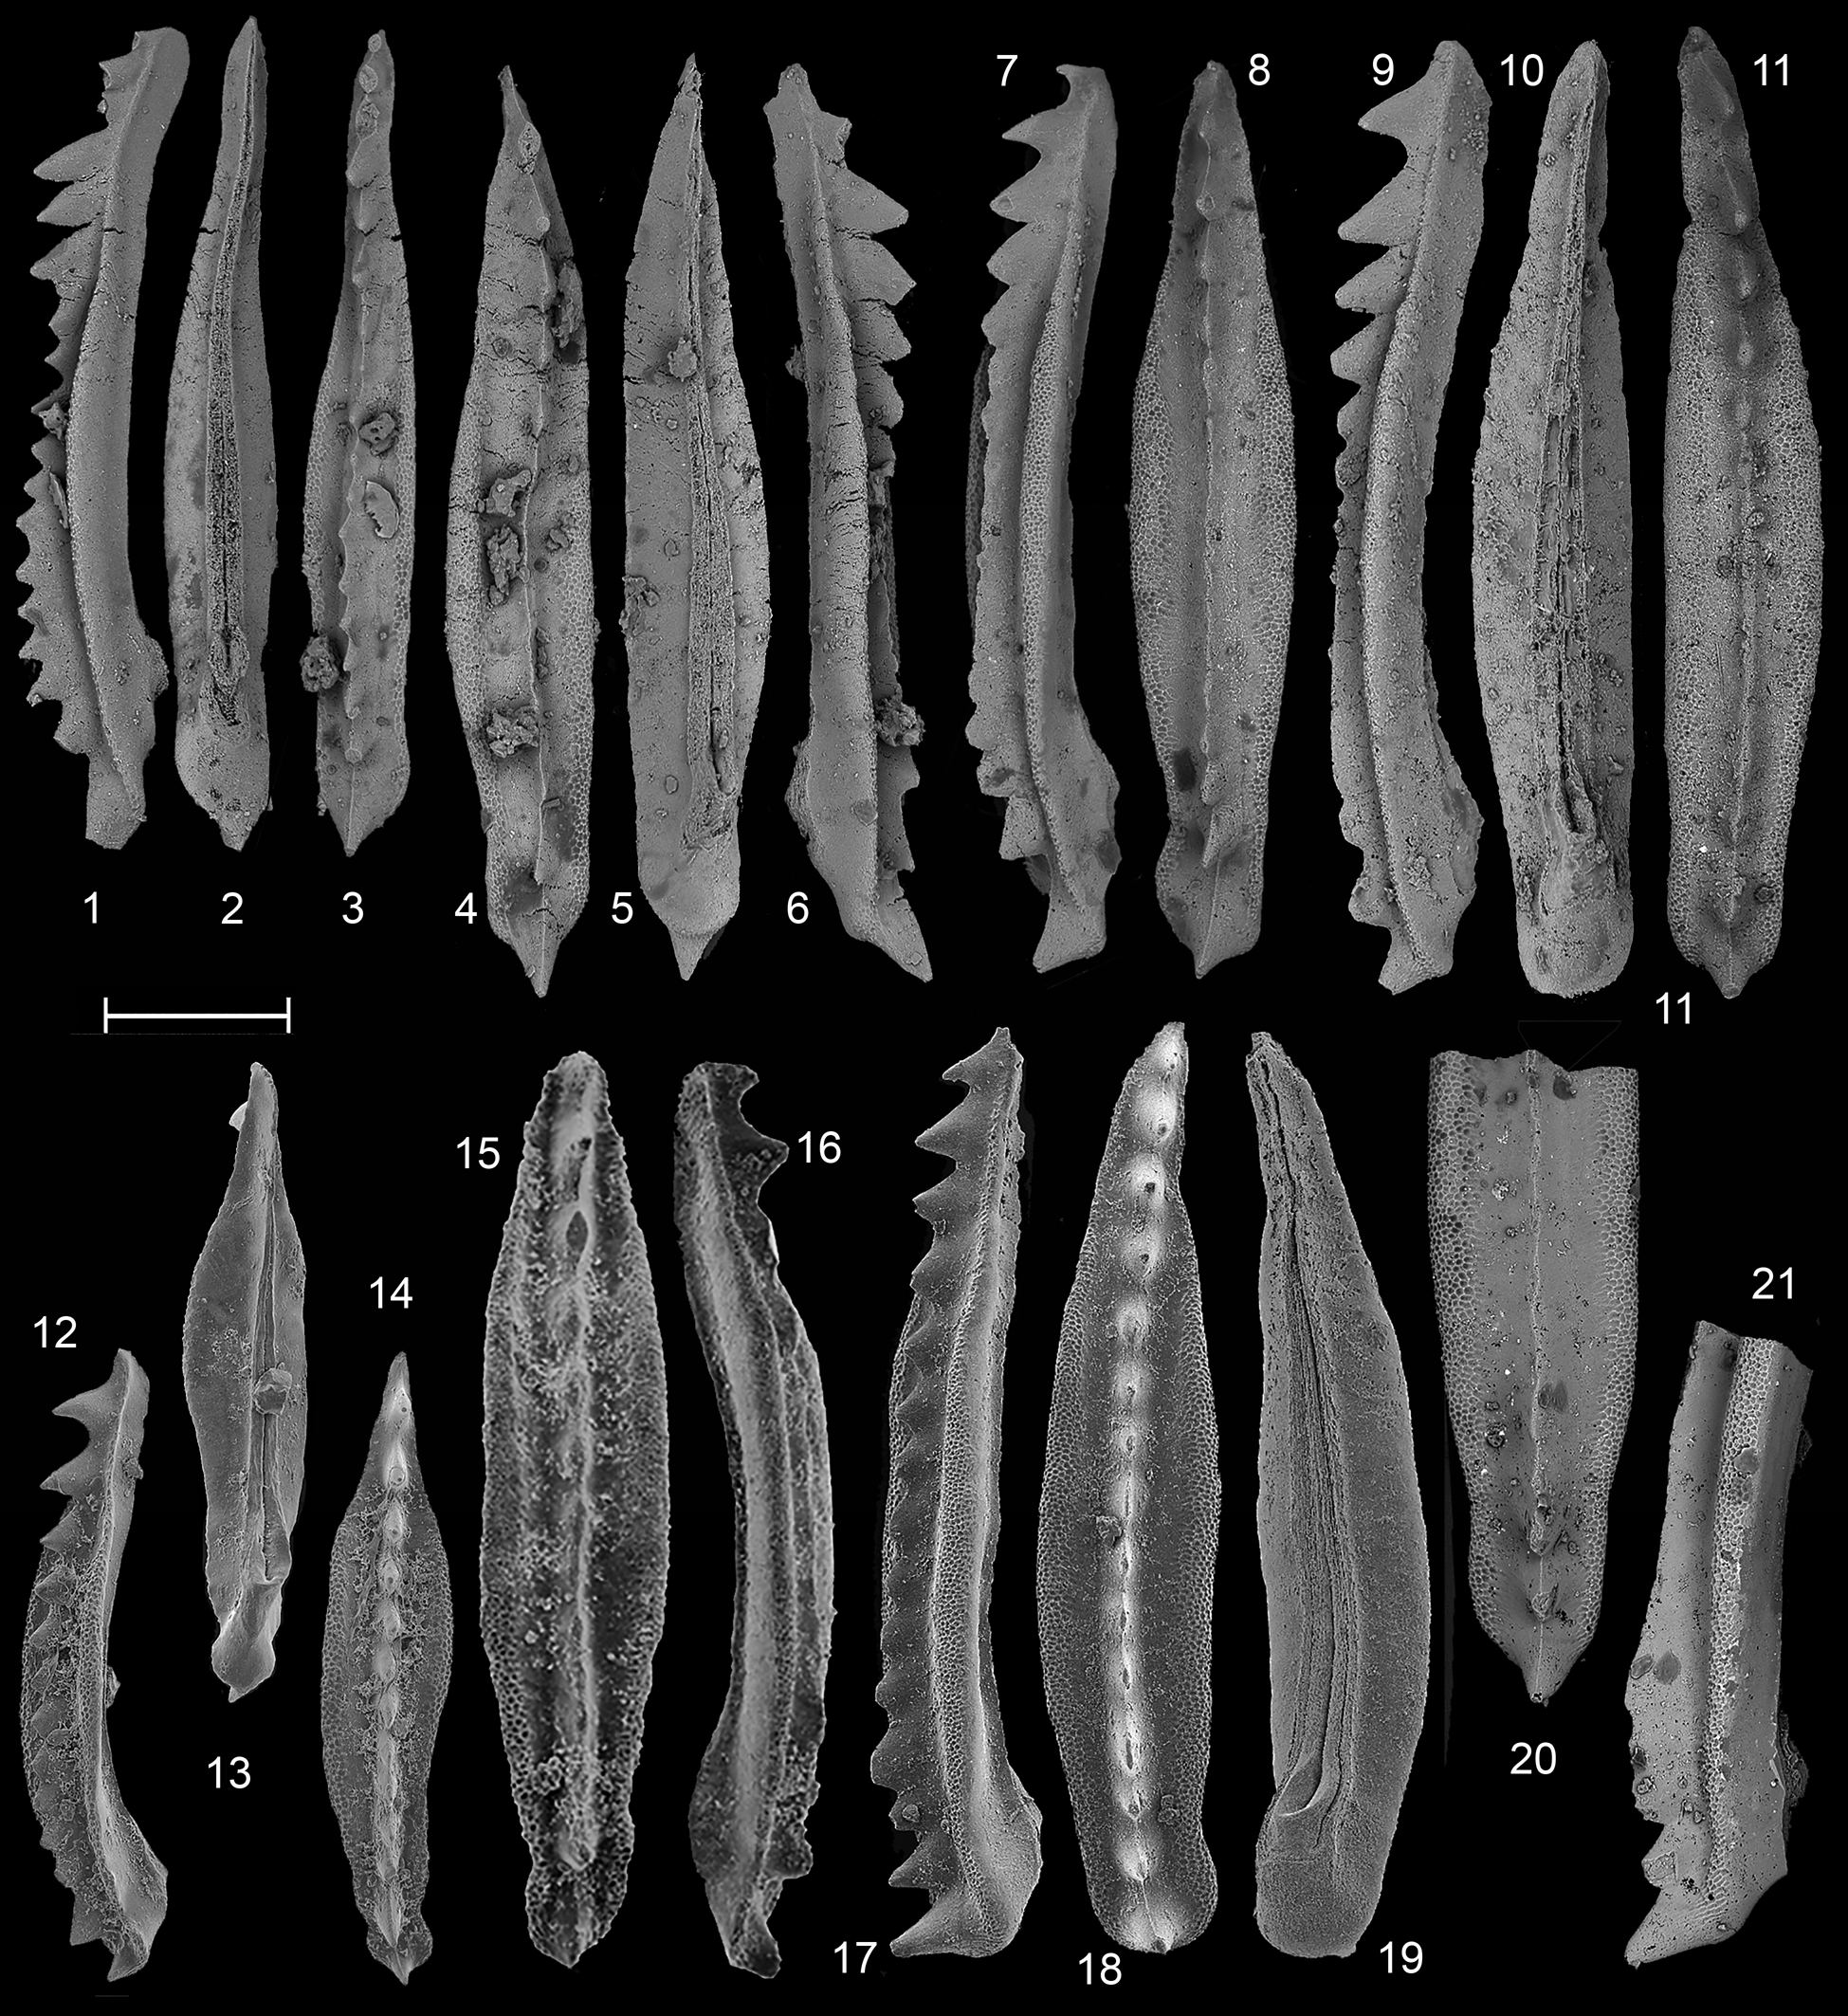 The Neogondolella constricta (Mosher and Clark, 1965) group in the 